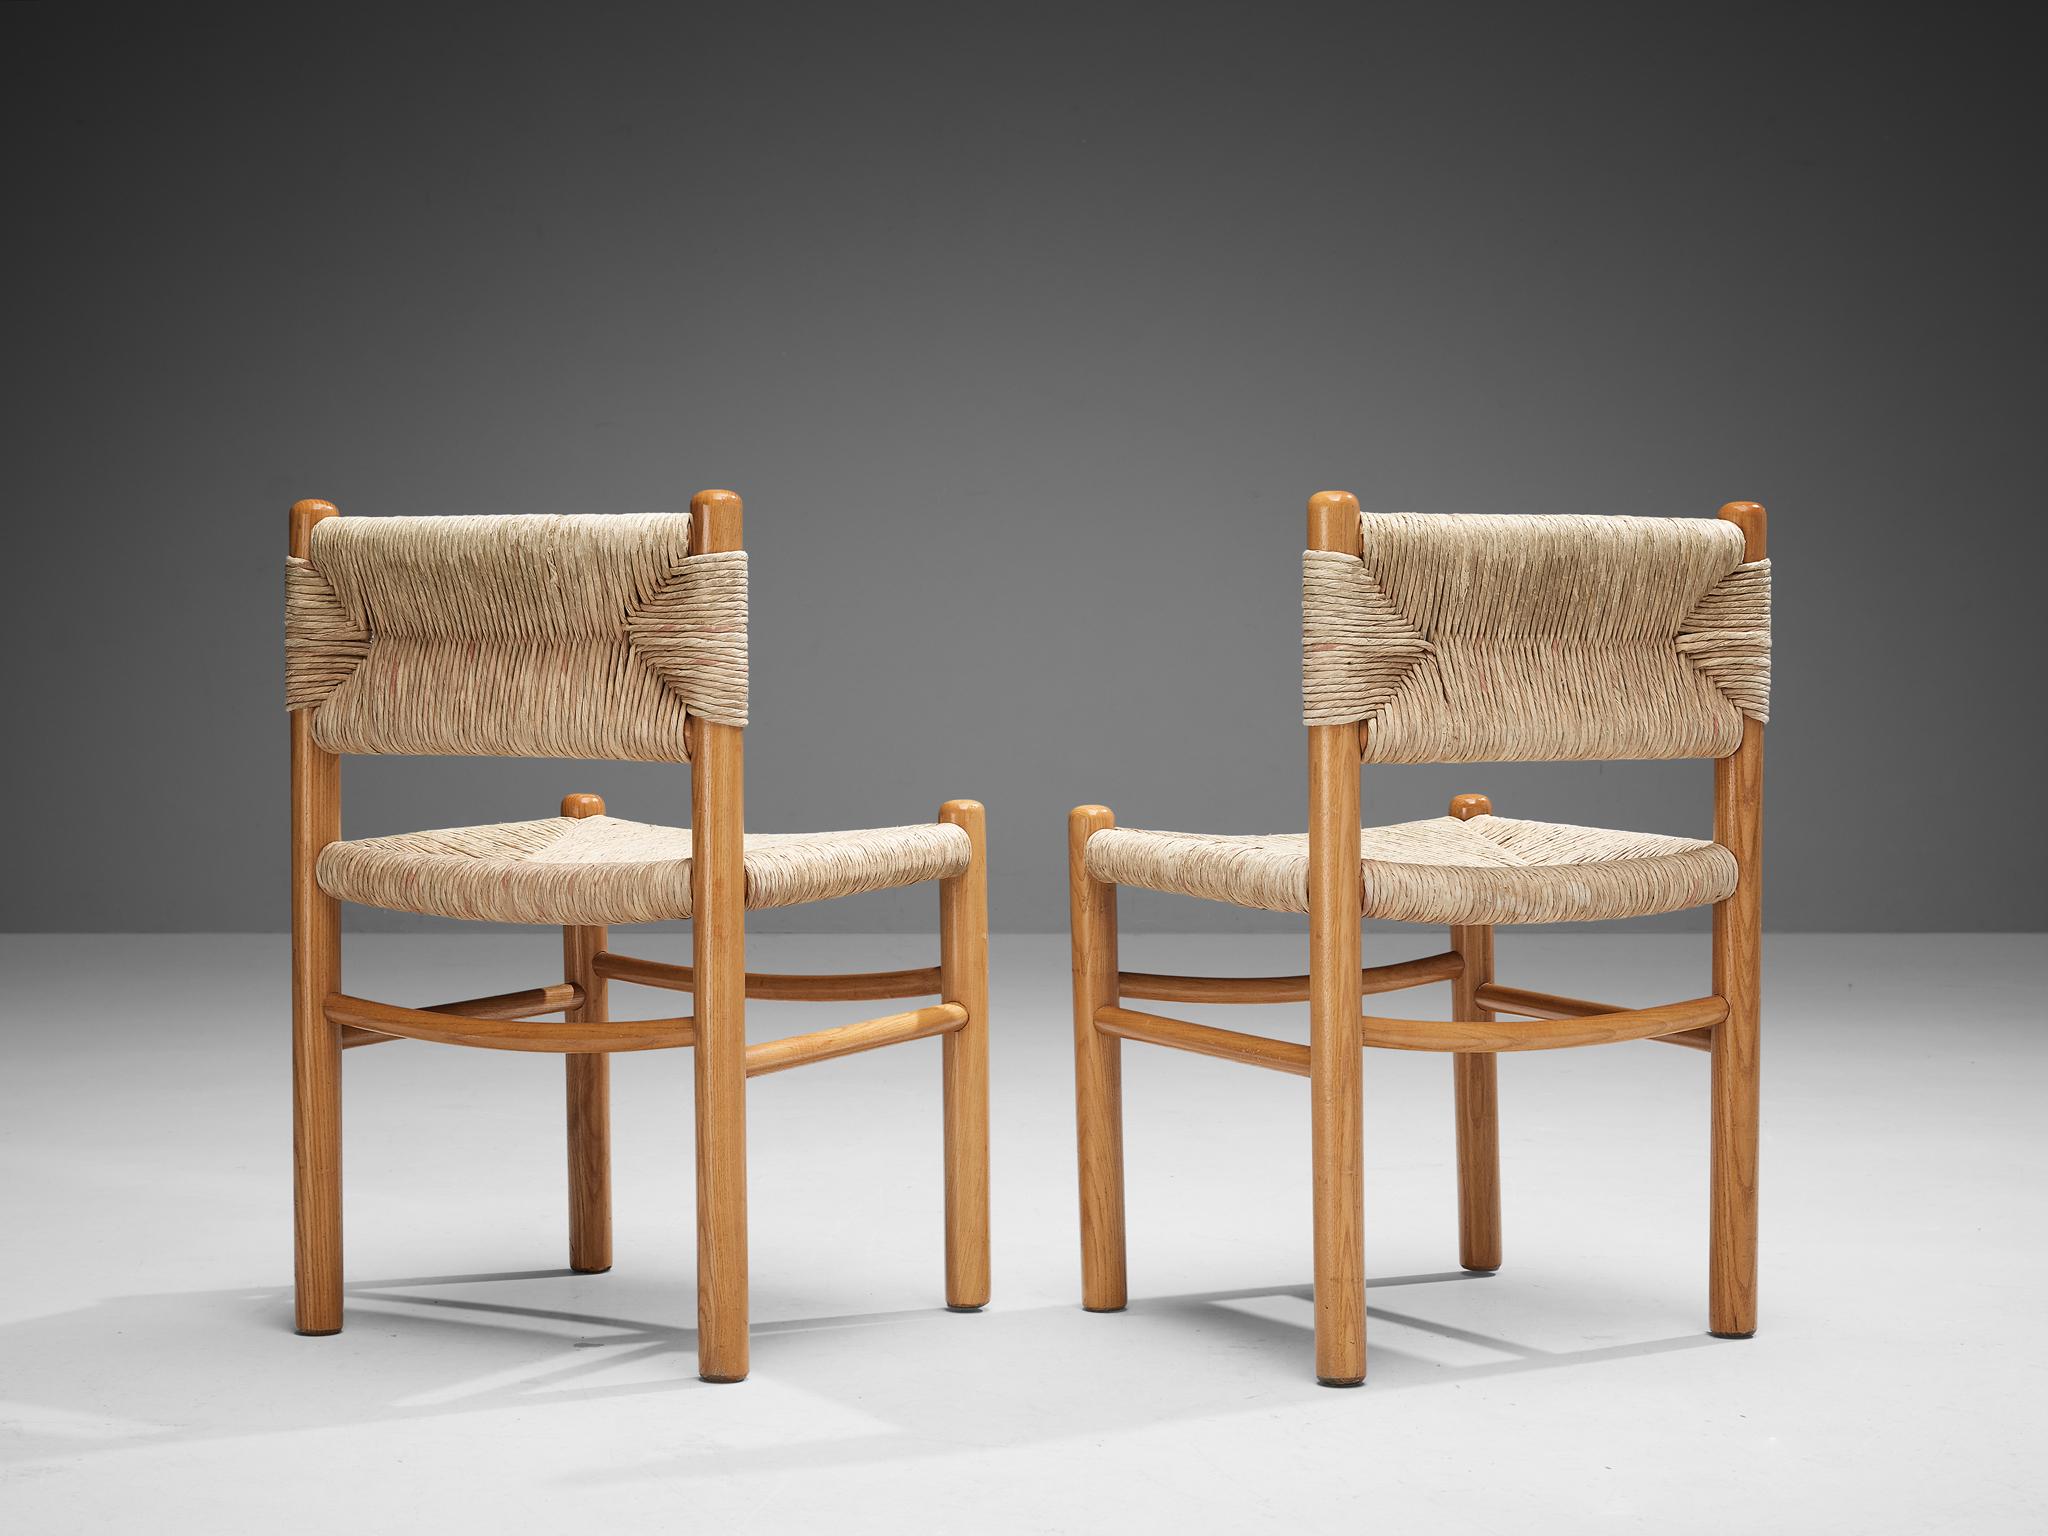 Pair of dining chairs, straw, ash, France, 1960s

This pair of side chairs features a solid wooden frame, consisting of cylindrical thick legs that are connected to each other with elegant slim horizontal slats. The seats and backrests are executed